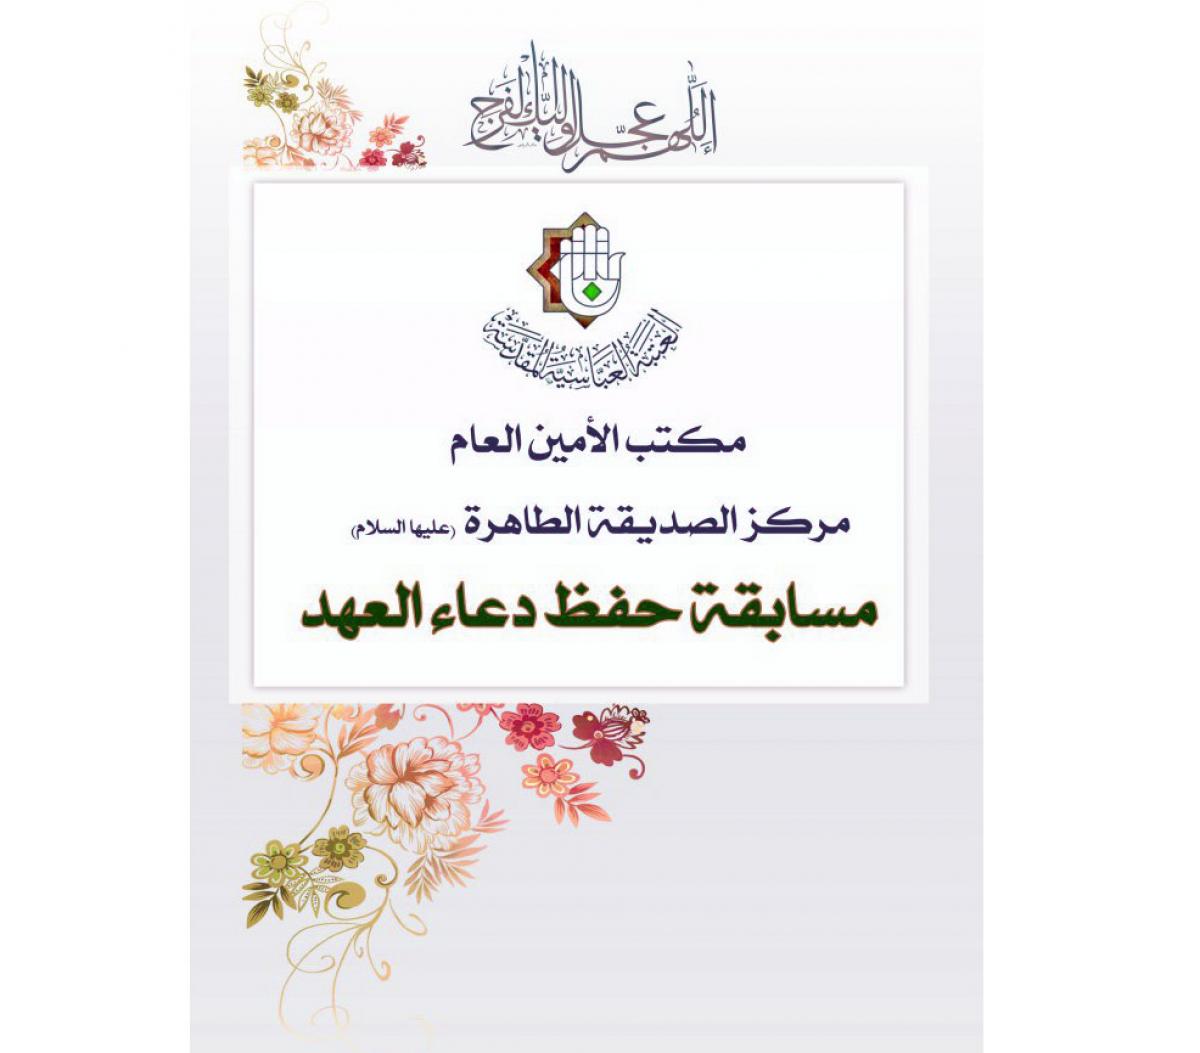 The Center of as-Siddiqa at-Tahira (peace be upon her) launches a women's contest to memorize Du'a al-'Ahd.